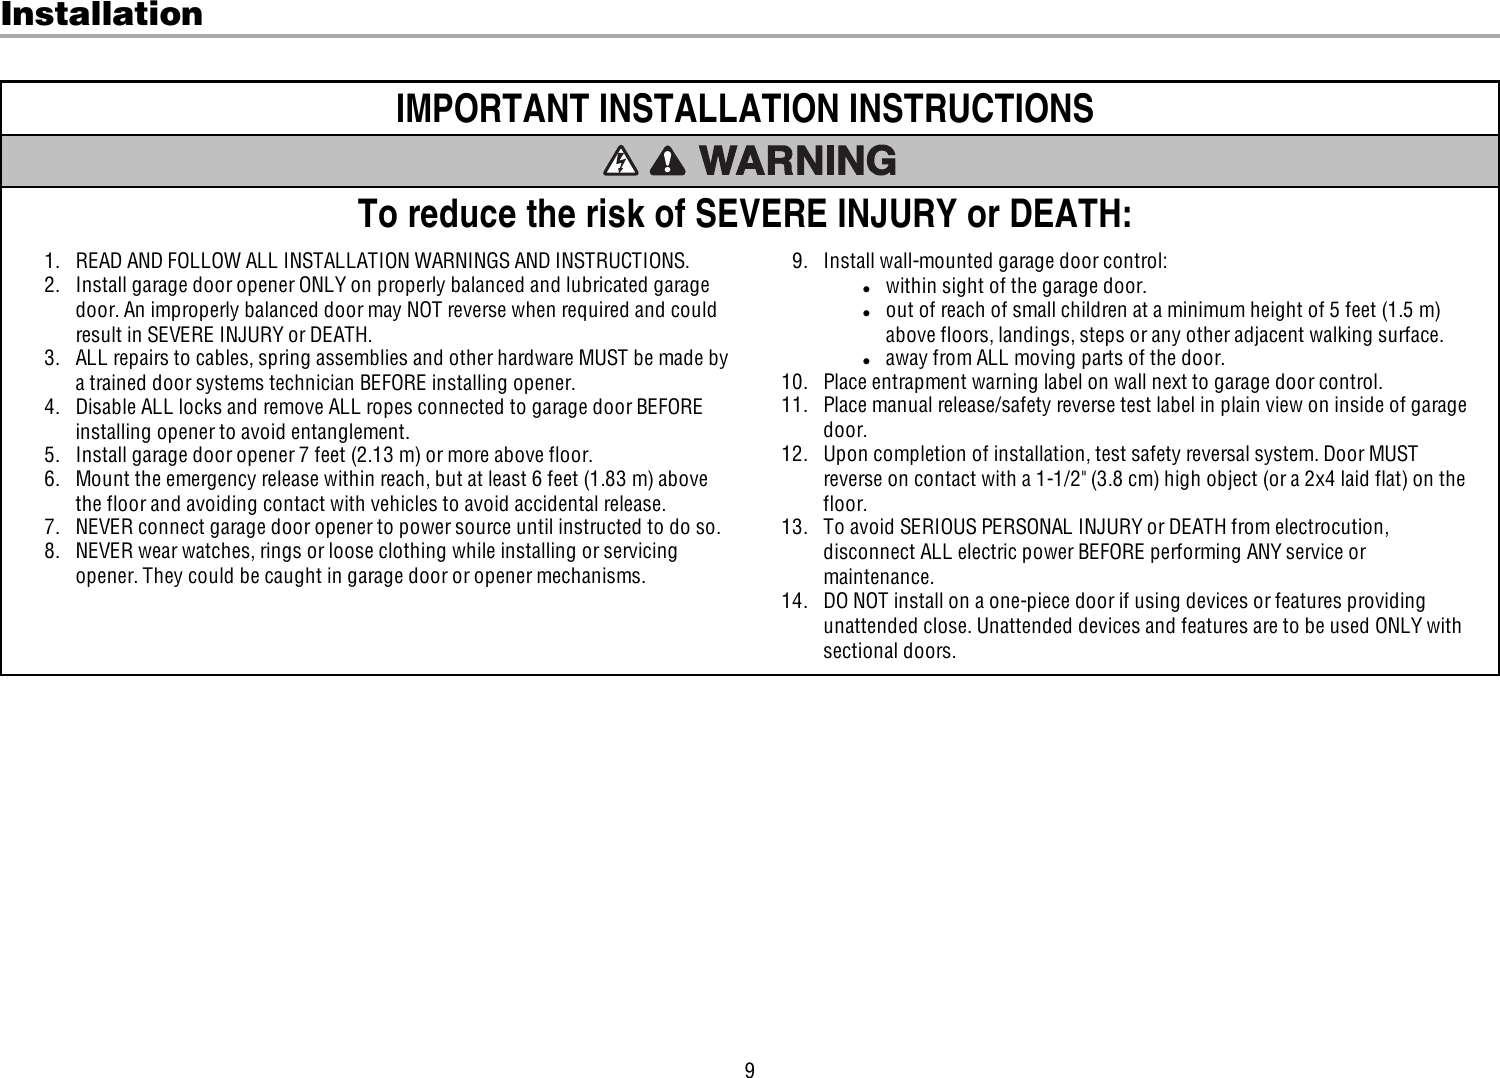 9InstallationIMPORTANT INSTALLATION INSTRUCTIONSTo reduce the risk of SEVERE INJURY or DEATH:1. READ AND FOLLOW ALL INSTALLATION WARNINGS AND INSTRUCTIONS.2. Install garage door opener ONLY on properly balanced and lubricated garagedoor. An improperly balanced door may NOT reverse when required and couldresult in SEVERE INJURY or DEATH.3. ALL repairs to cables, spring assemblies and other hardware MUST be made bya trained door systems technician BEFORE installing opener.4. Disable ALL locks and remove ALL ropes connected to garage door BEFOREinstalling opener to avoid entanglement.5. Install garage door opener 7 feet (2.13 m) or more above floor.6. Mount the emergency release within reach, but at least 6 feet (1.83 m) abovethe floor and avoiding contact with vehicles to avoid accidental release.7. NEVER connect garage door opener to power source until instructed to do so.8. NEVER wear watches, rings or loose clothing while installing or servicingopener. They could be caught in garage door or opener mechanisms.9. Install wall-mounted garage door control:lwithin sight of the garage door.lout of reach of small children at a minimum height of 5feet (1.5m)above floors, landings, steps or any other adjacent walking surface.laway from ALL moving parts of the door.10. Place entrapment warning label on wall next to garage door control.11. Place manual release/safety reverse test label in plain view on inside of garagedoor.12. Upon completion of installation, test safety reversal system. Door MUSTreverse on contact with a 1-1/2&quot; (3.8cm) high object (or a 2x4 laid flat) on thefloor.13. To avoid SERIOUS PERSONAL INJURY or DEATH from electrocution,disconnect ALL electric power BEFORE performing ANY service ormaintenance.14. DO NOT install on a one-piece door if using devices or features providingunattended close. Unattended devices and features are to be used ONLY withsectional doors.